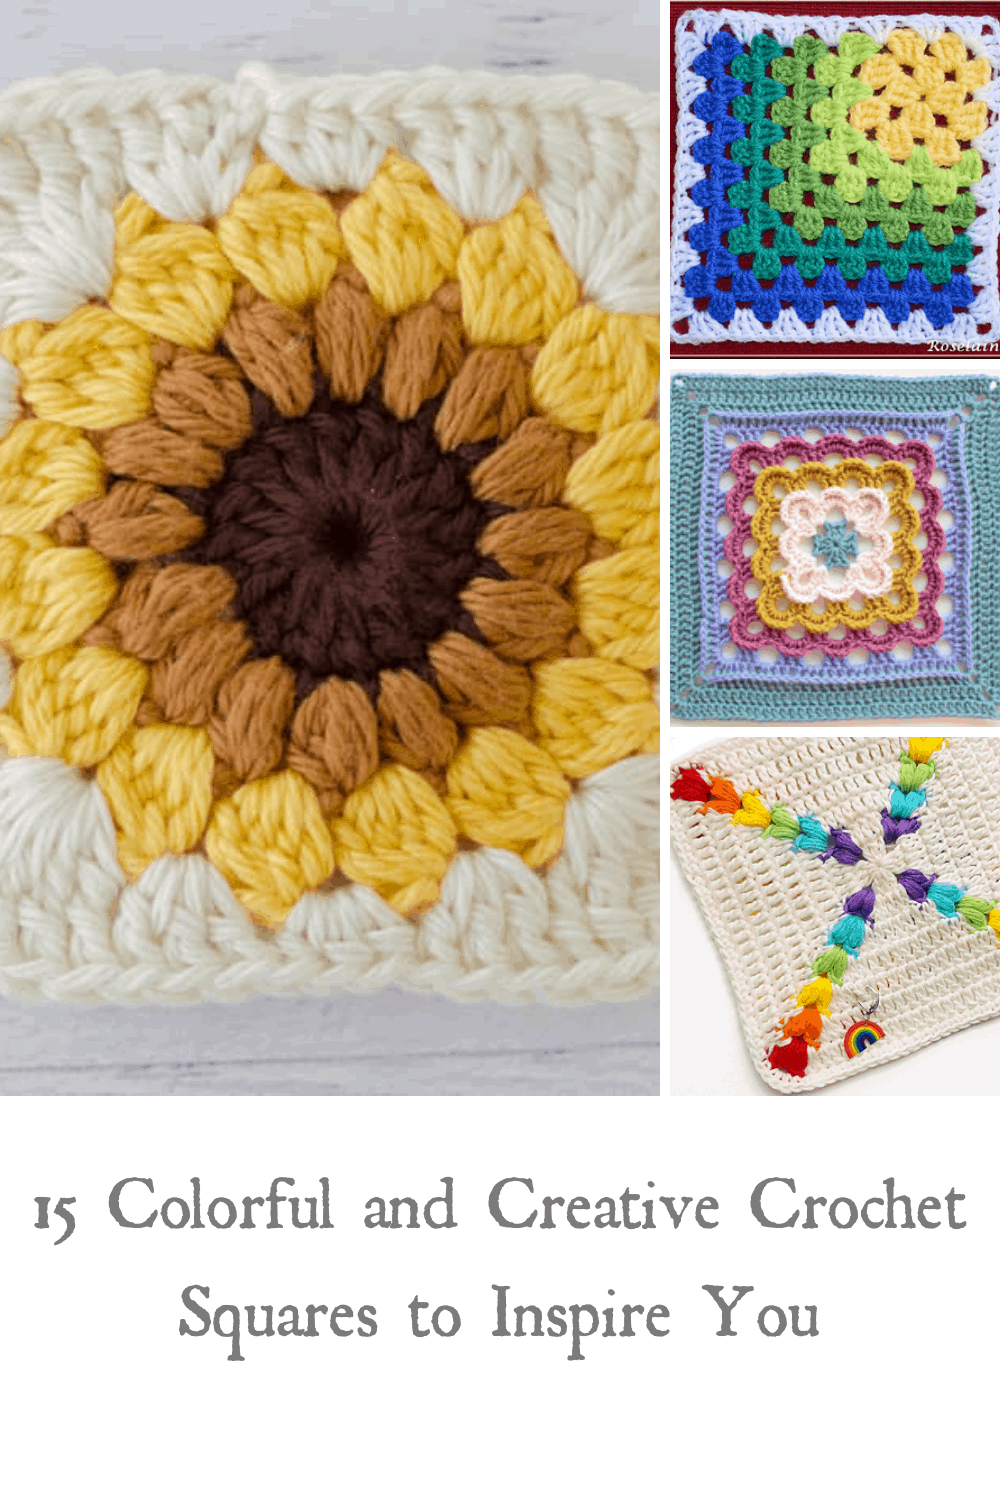 Unleash Your Creativity: 25+ Stunning Crochet Squares with Free